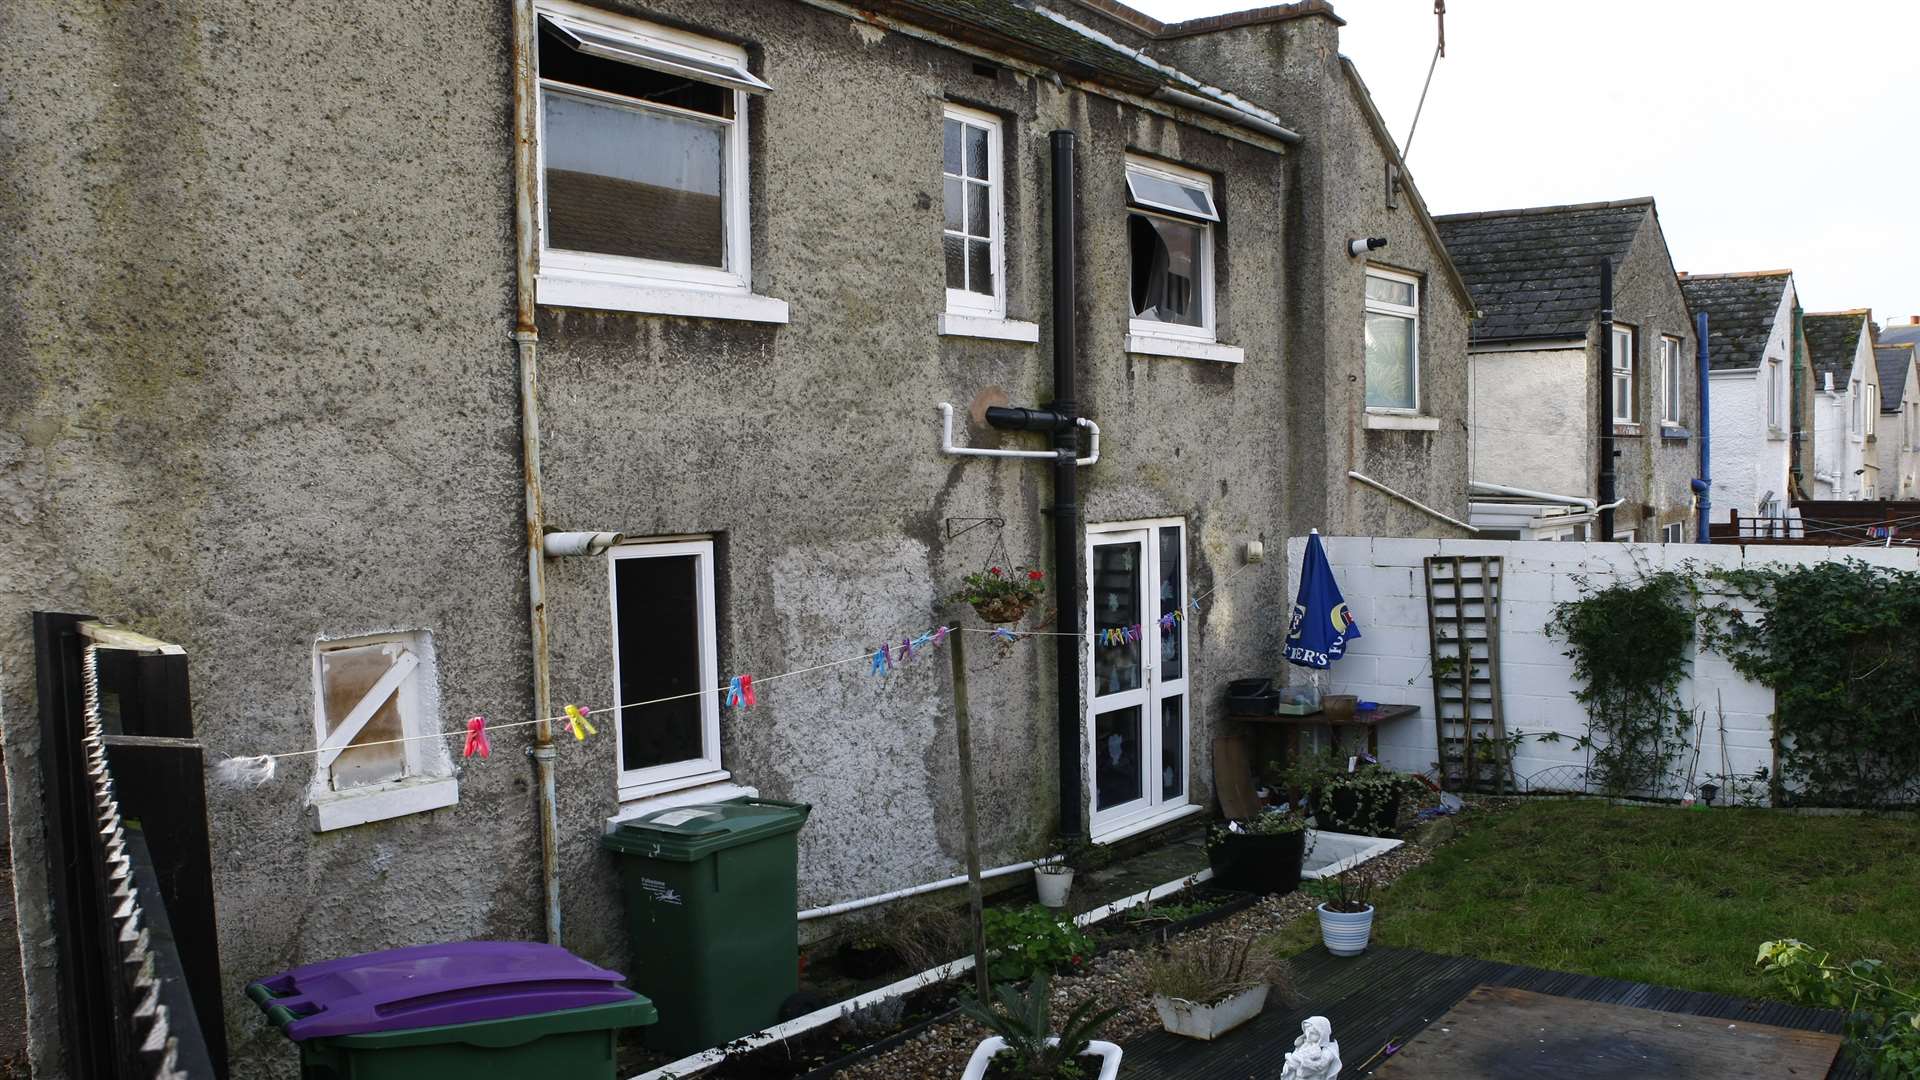 The rear of the house which is now uninhabitable after the fire